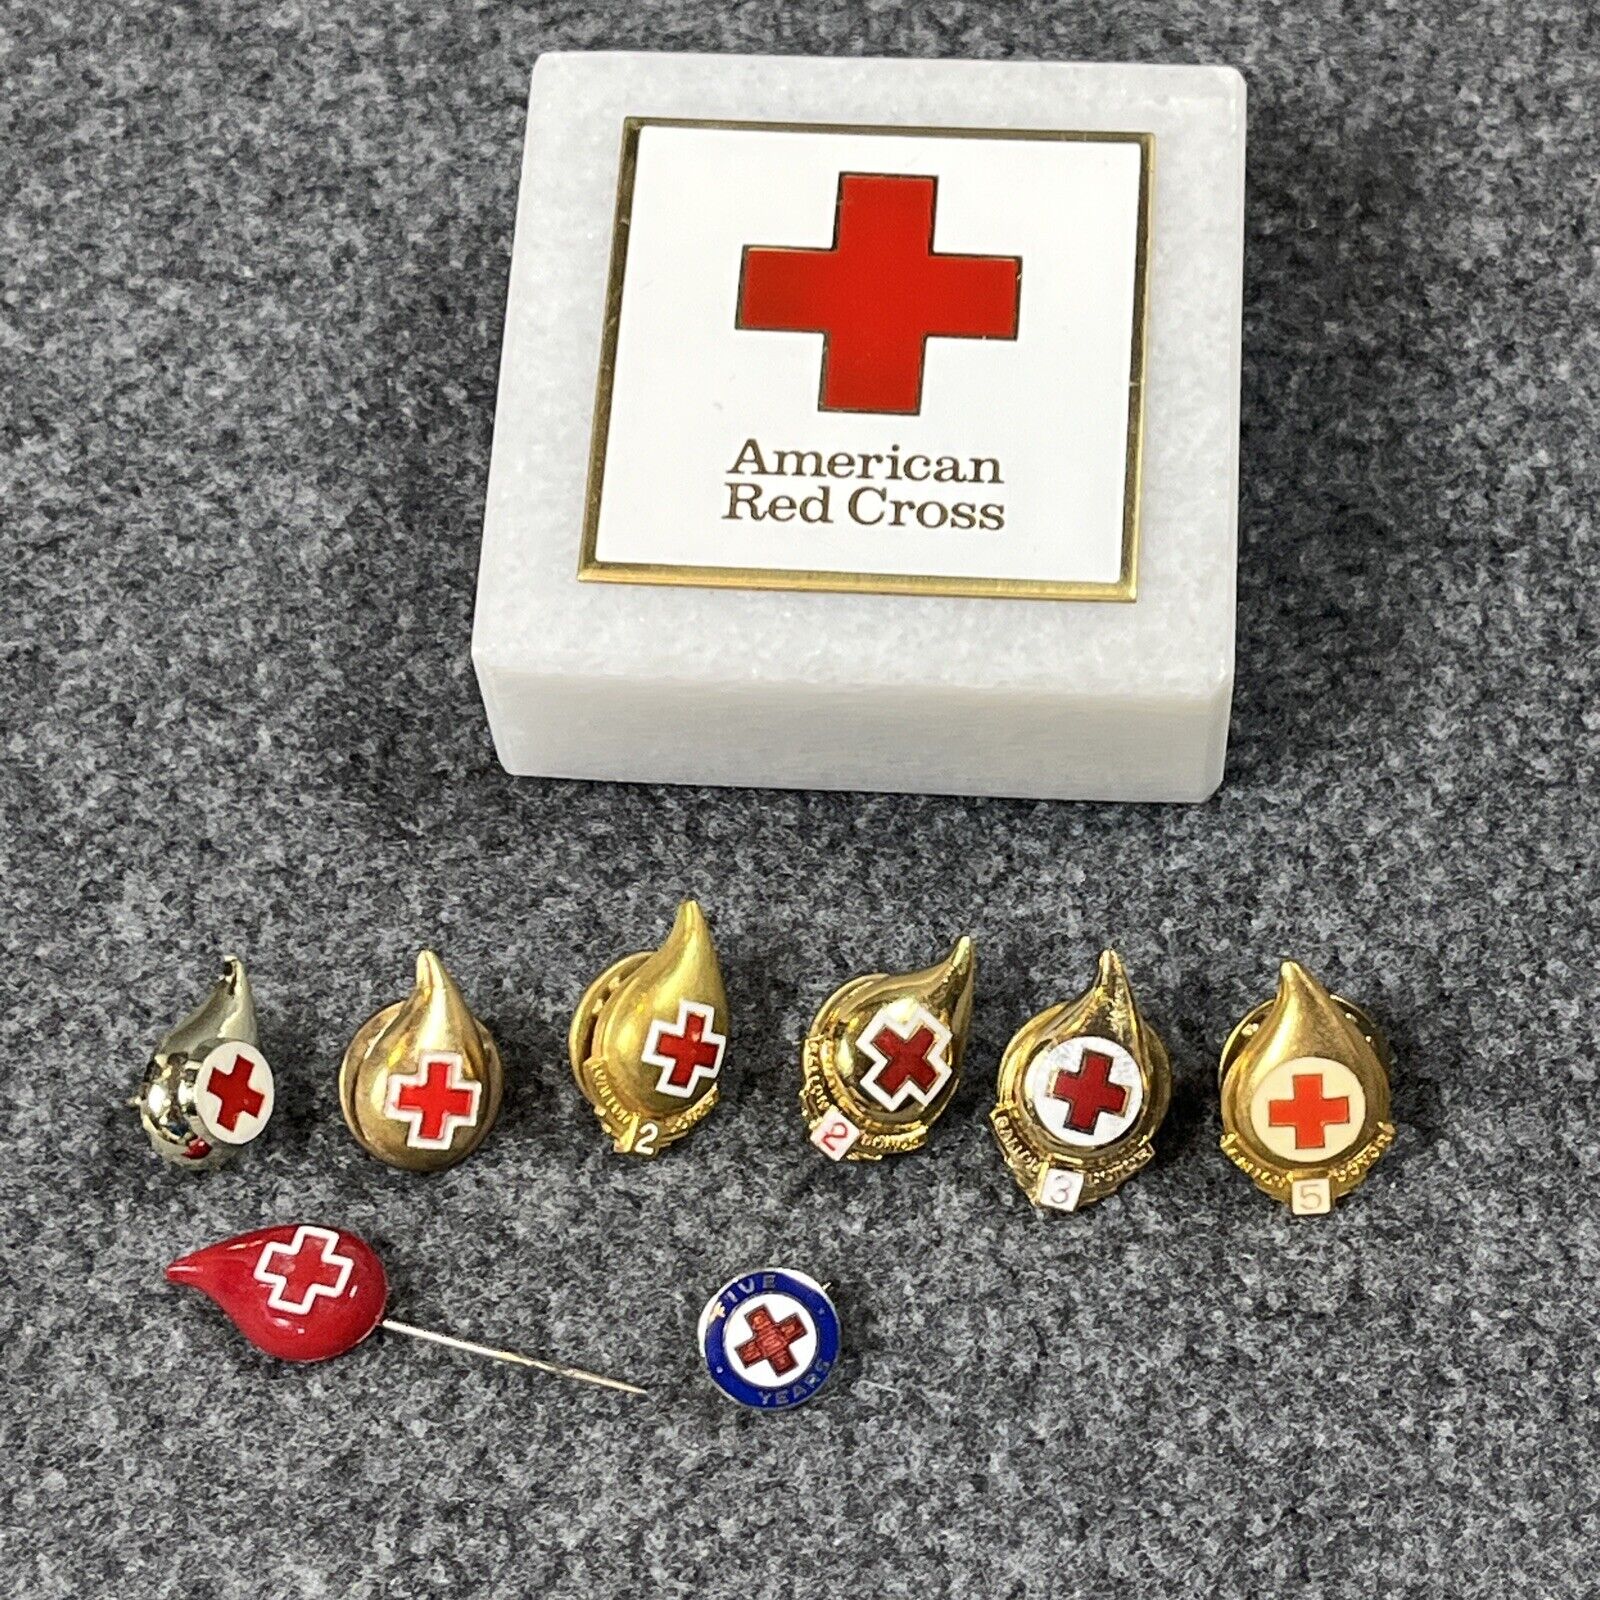 Red Cross Blood Donor Pins Gallon Gold Plated VTG Lapel Button + Paper Weight